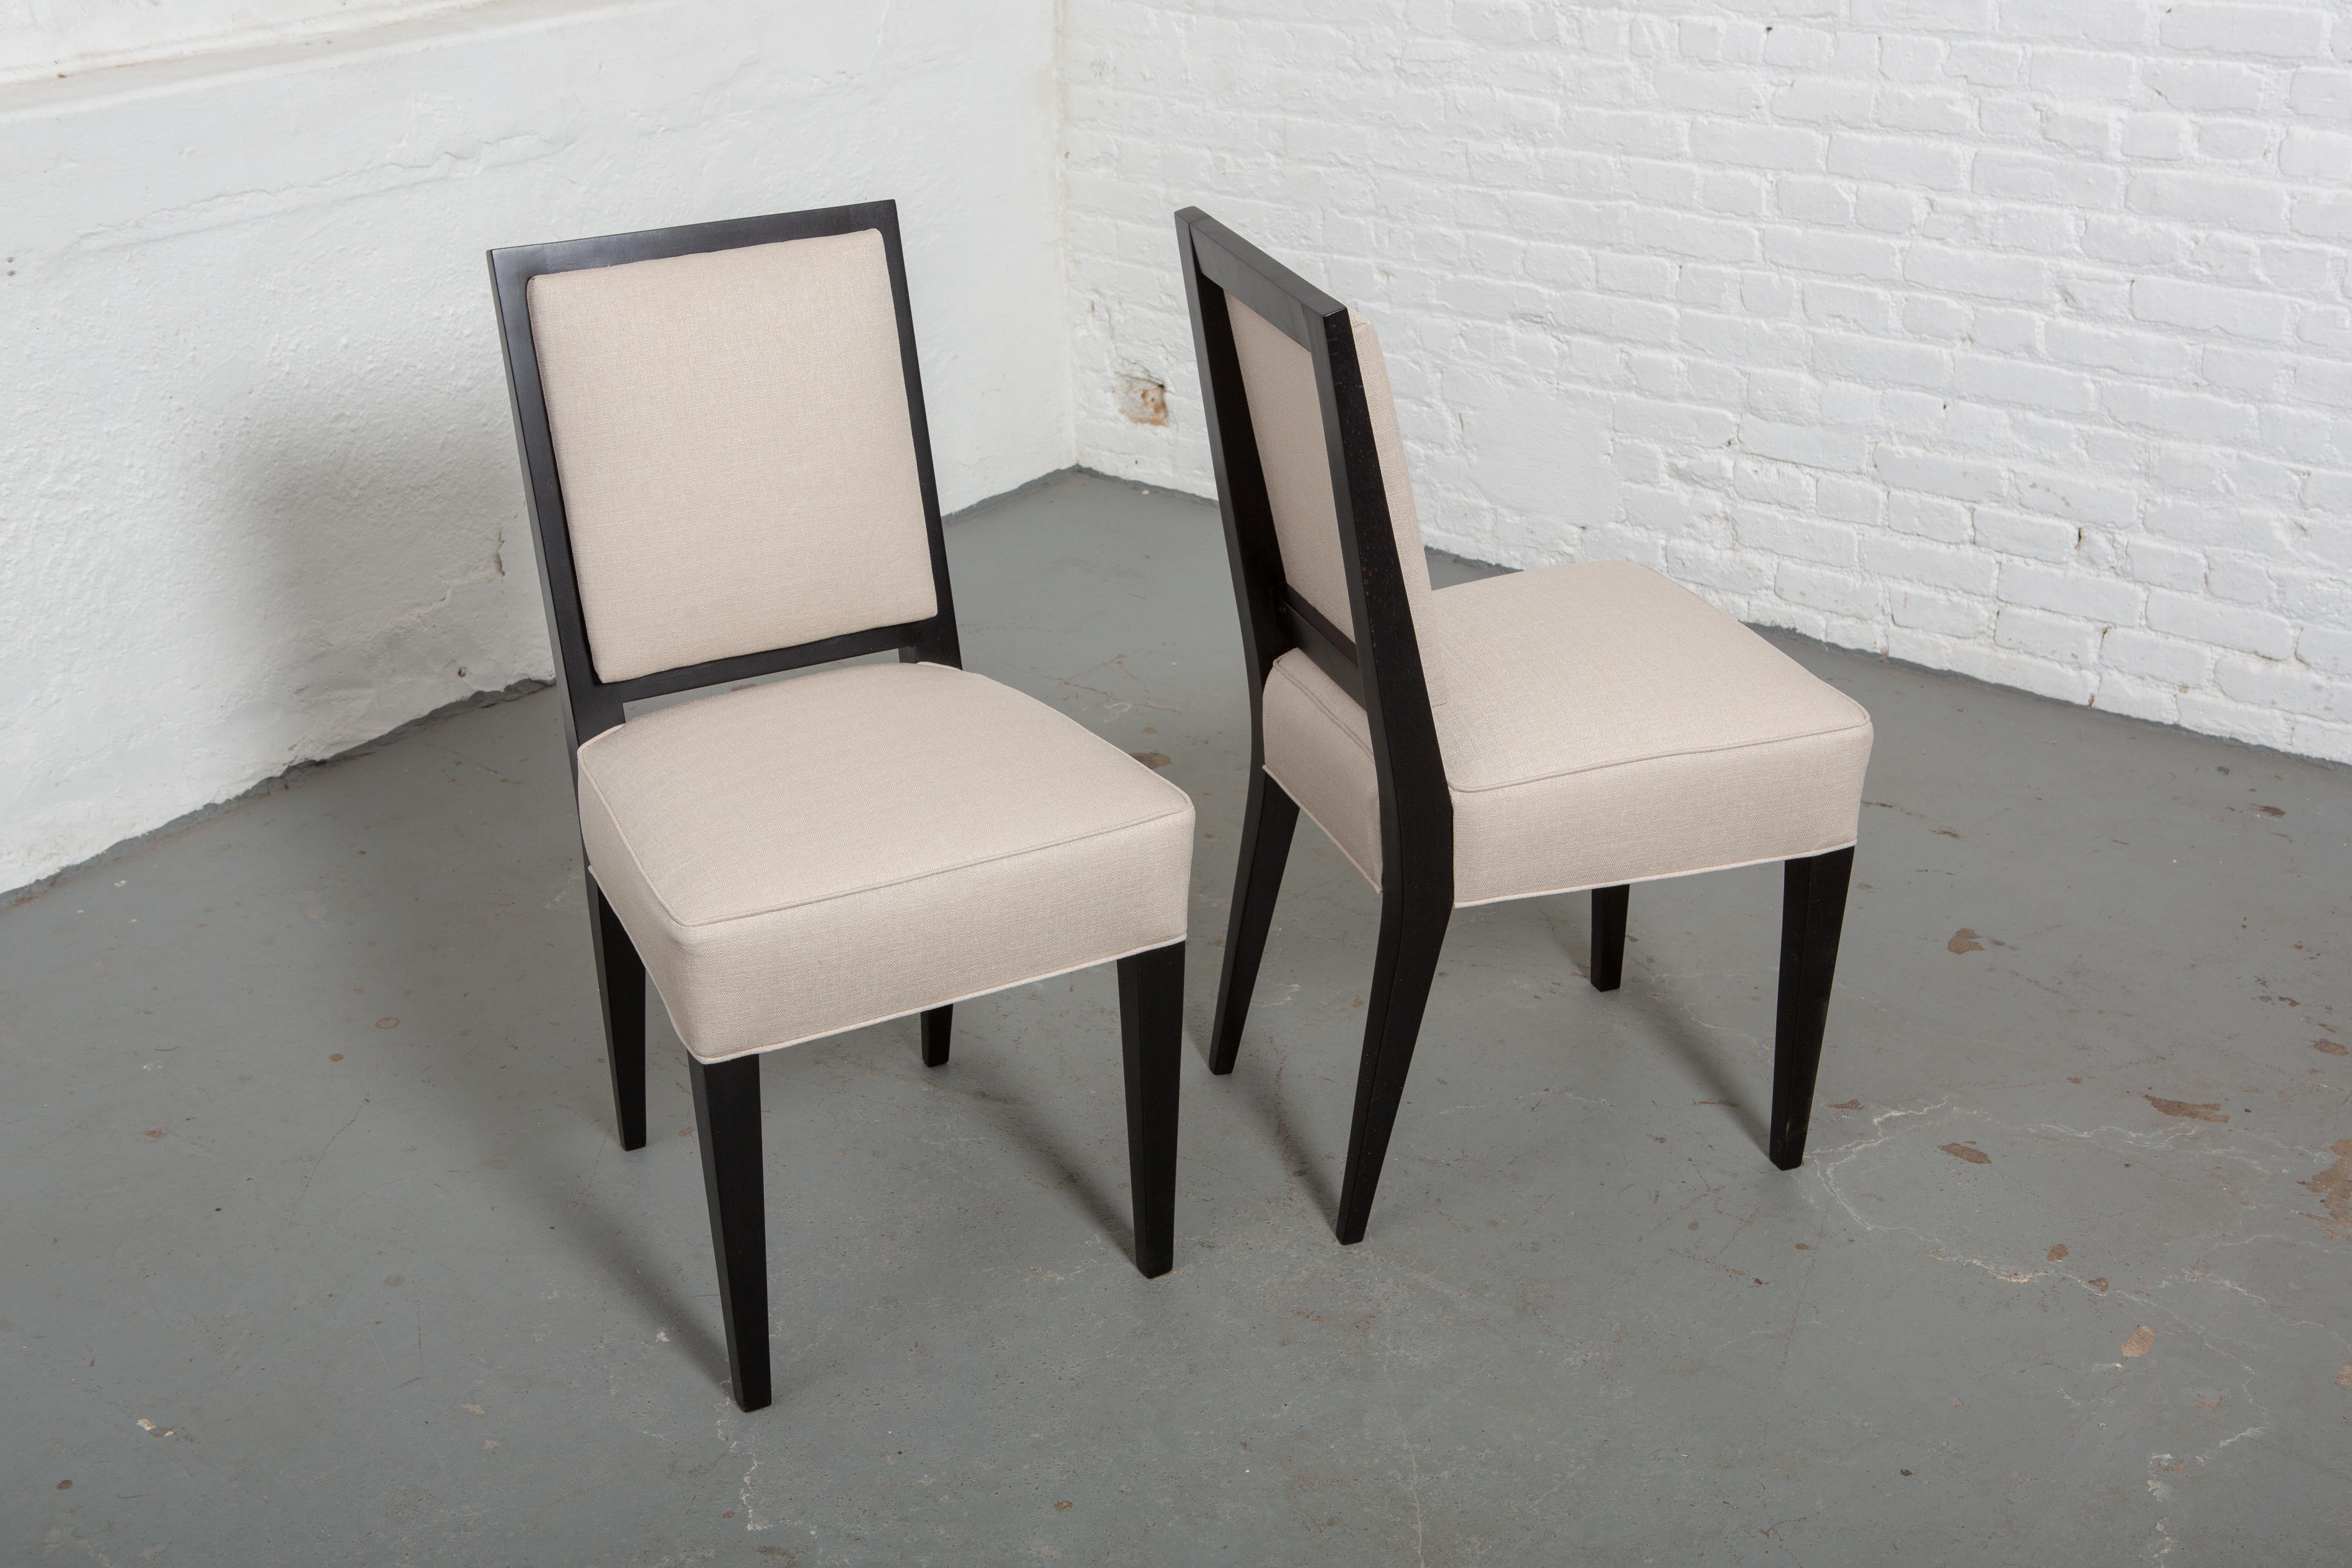 Set of 6 newly upholstered and restored French Art Deco Style ebonized chairs with off-white upholstery. Straight back and slightly tapered sculptural legs.
Measures: 15.5